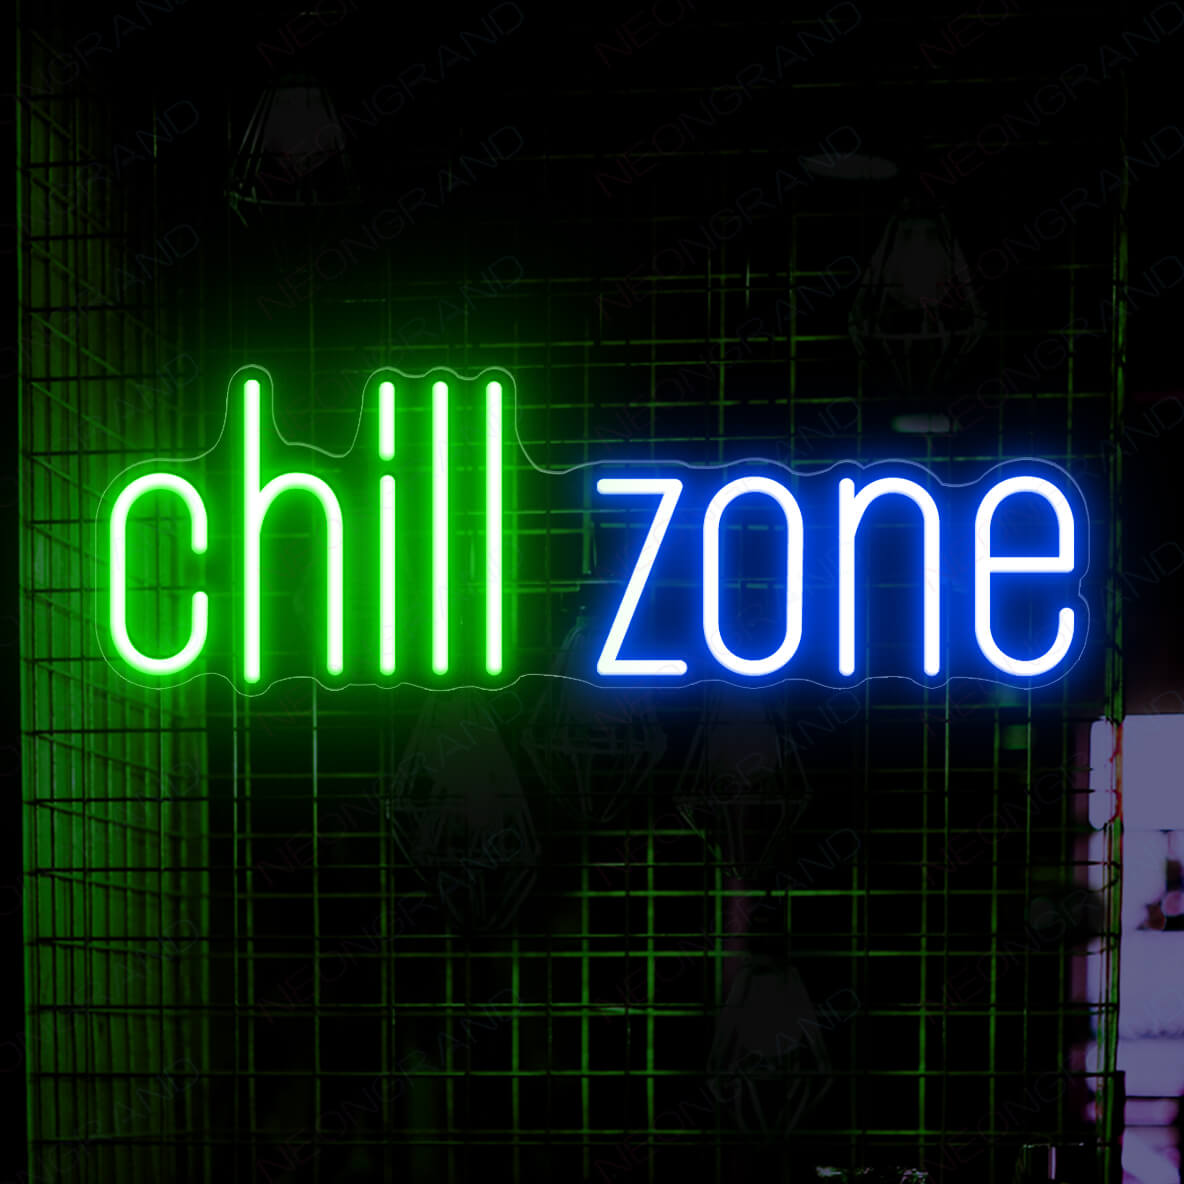 Chill Zone Neon Sign Led Chill Neon Light Sign blue